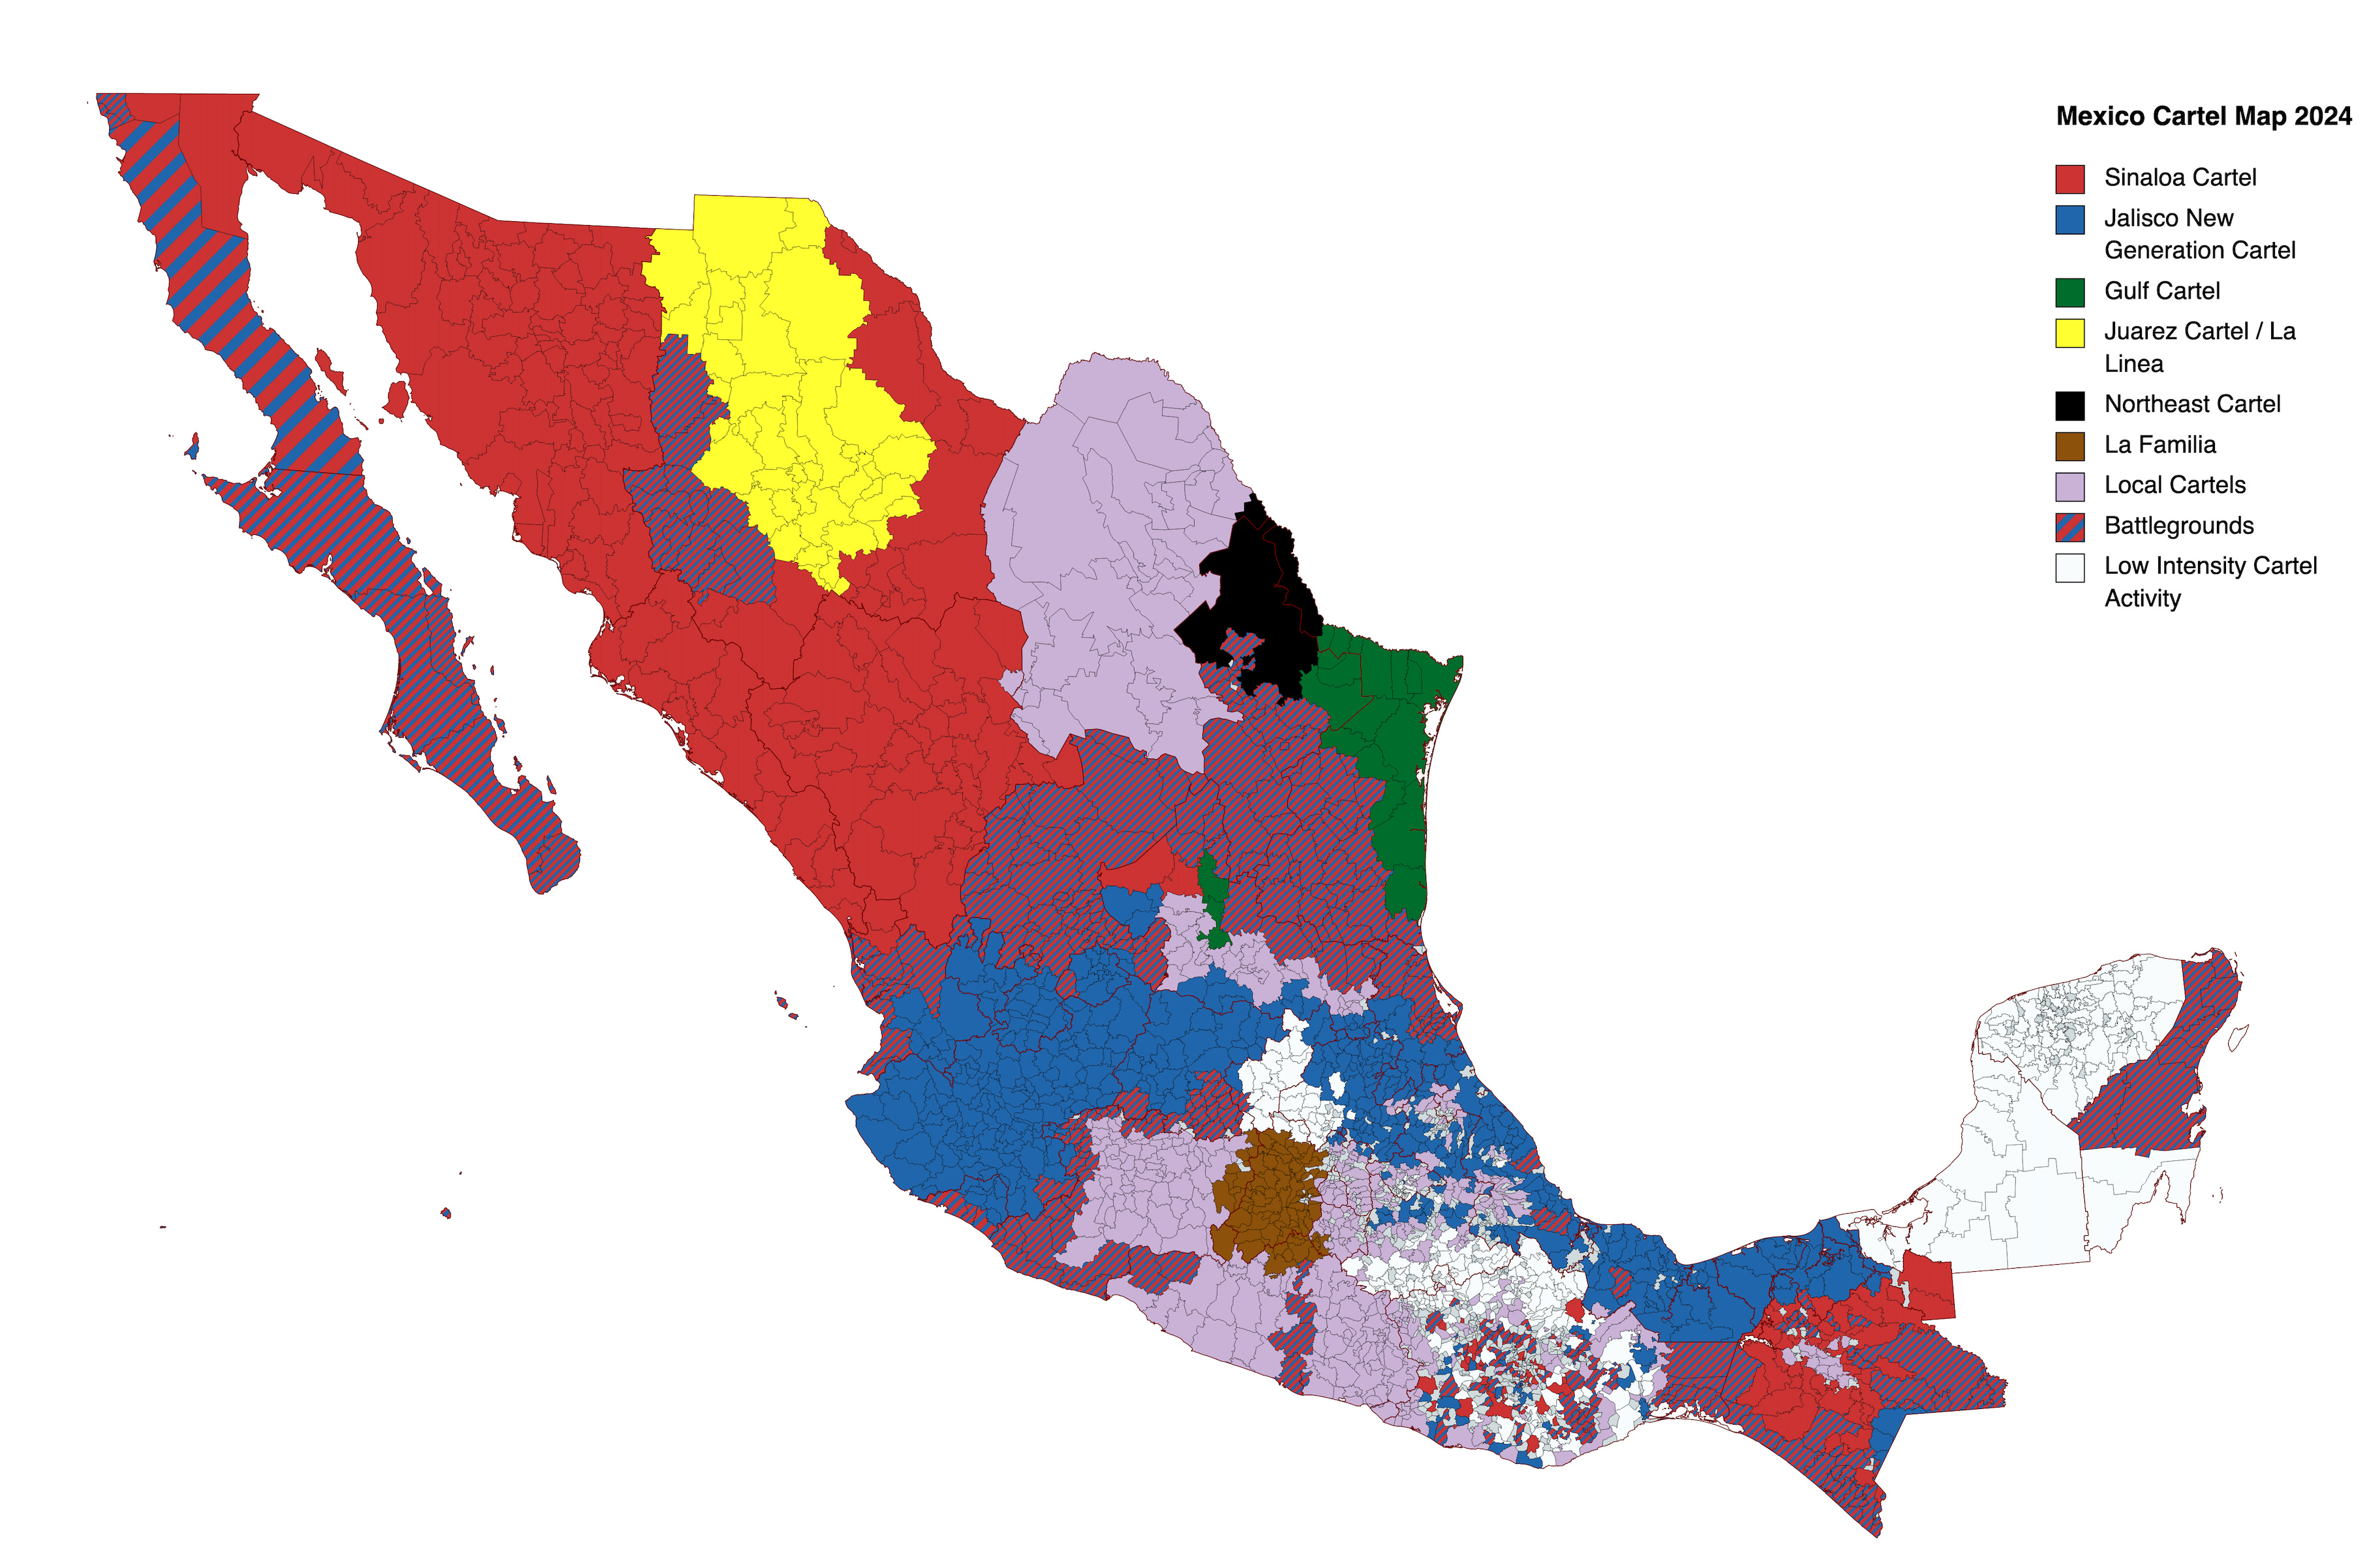 Mexico's Cartel Map 2024 CrashOut by Ioan Grillo